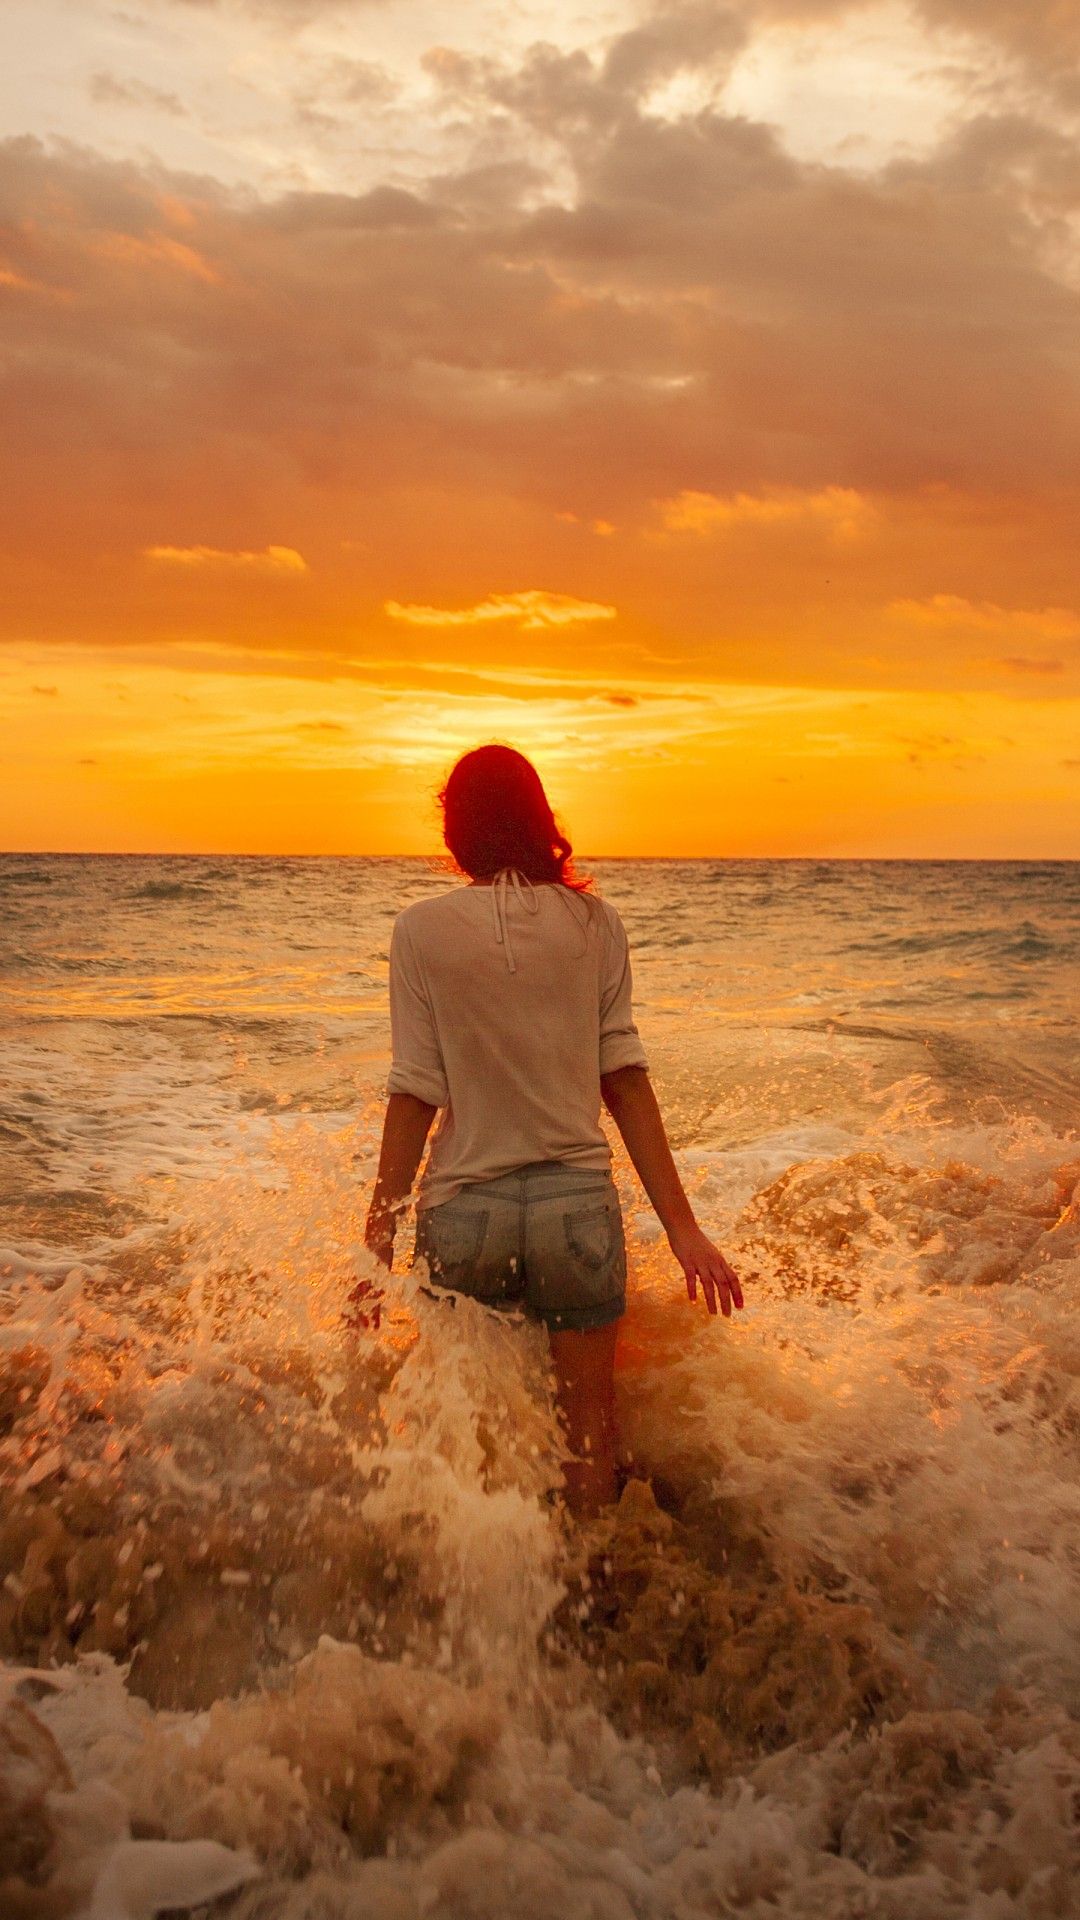 Girl Sea Sunset IPhone 6 6 Plus And IPhone 5 4 Wallpaper